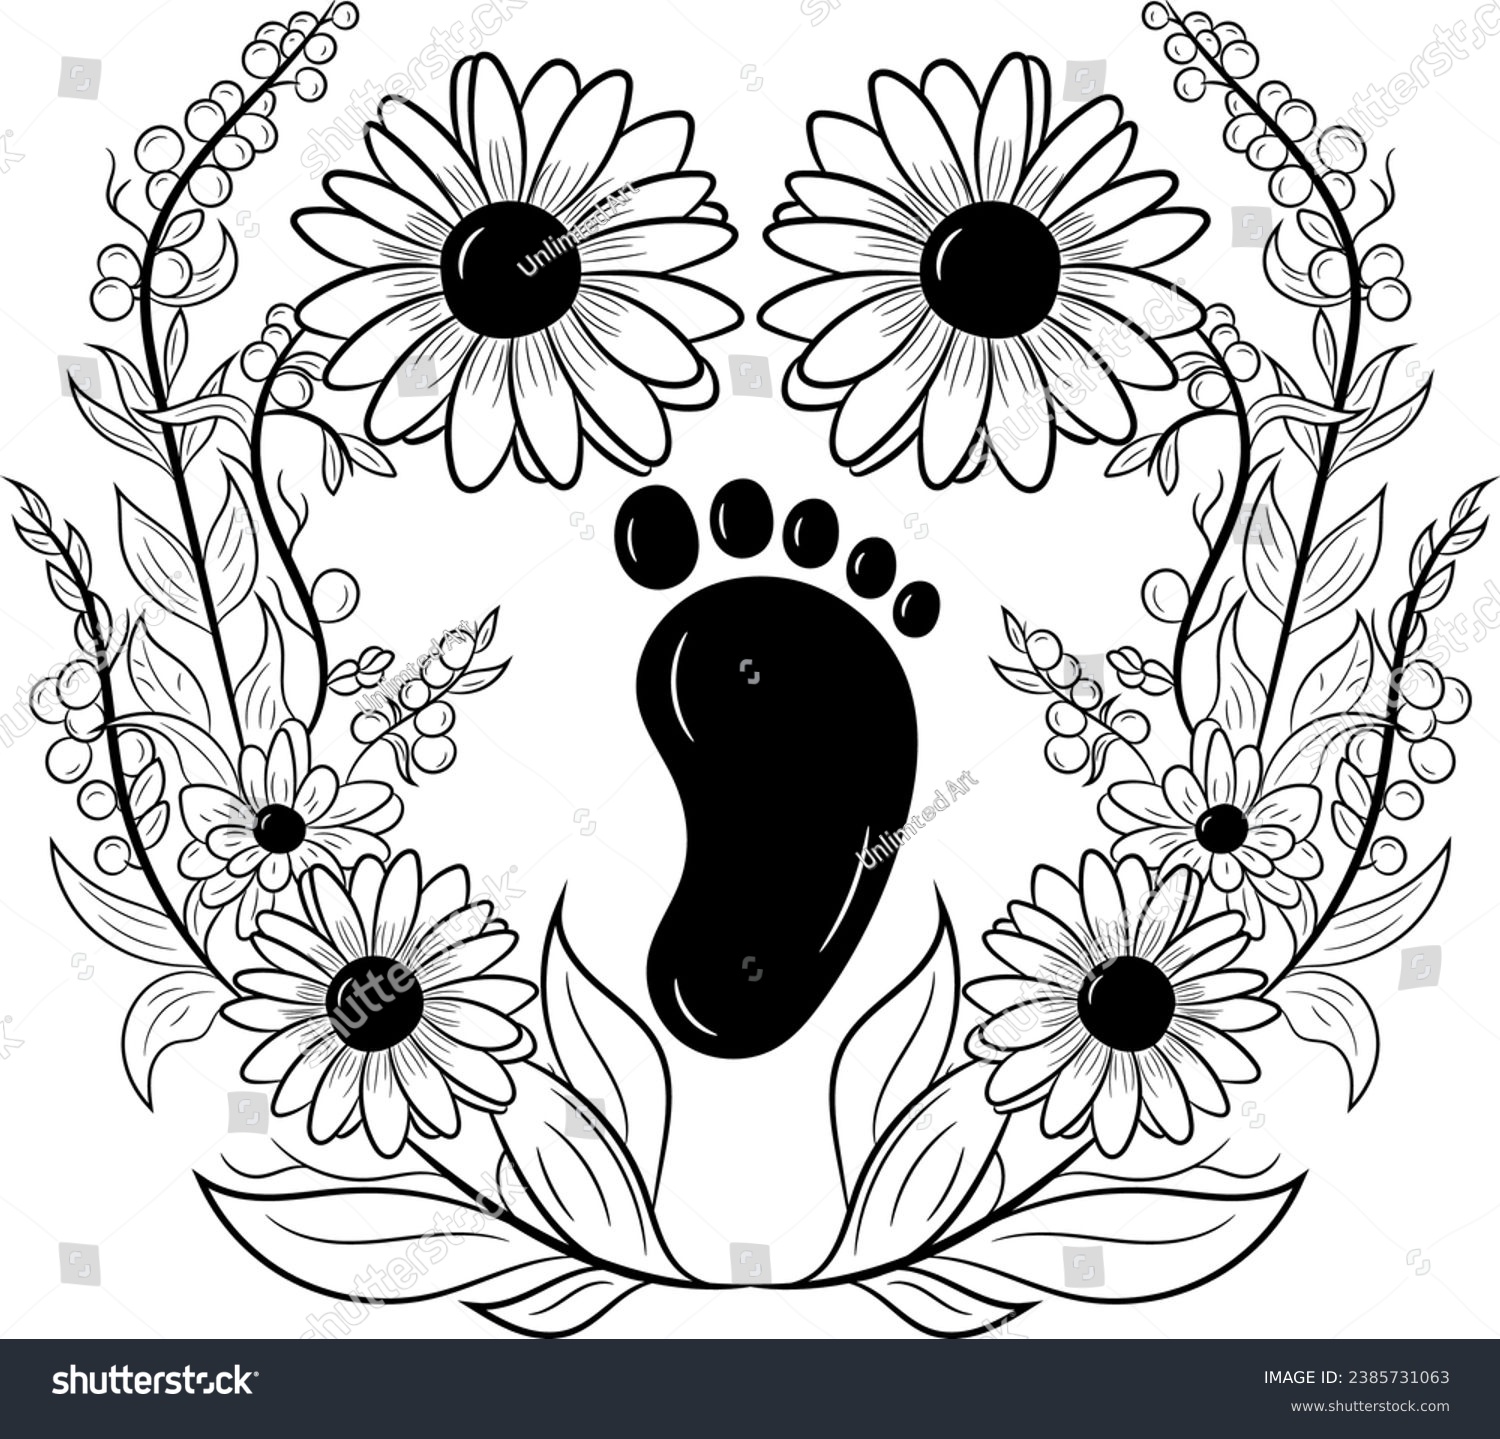 SVG of Black And White Baby Footprint With Flowers svg